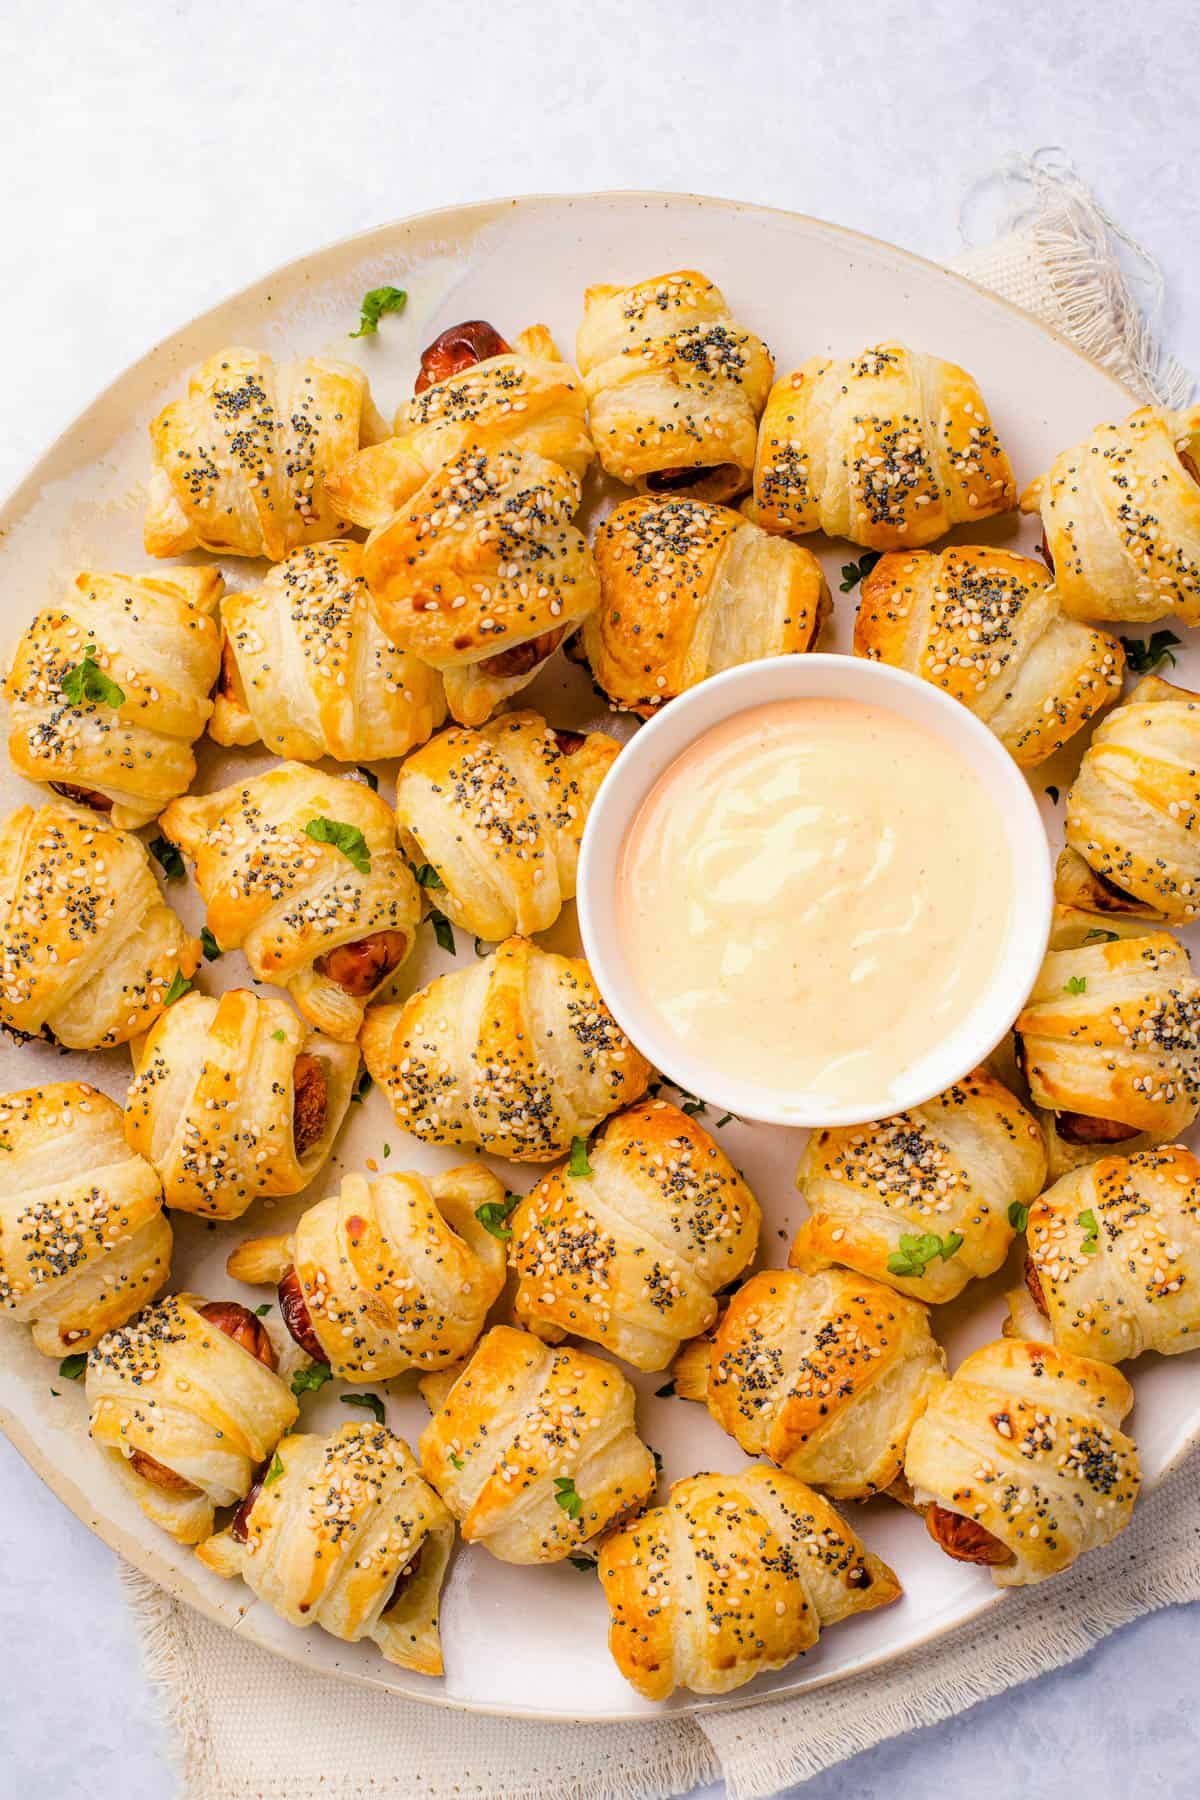 A platter of pigs in a blanket with a bowl of dipping sauce in the center.